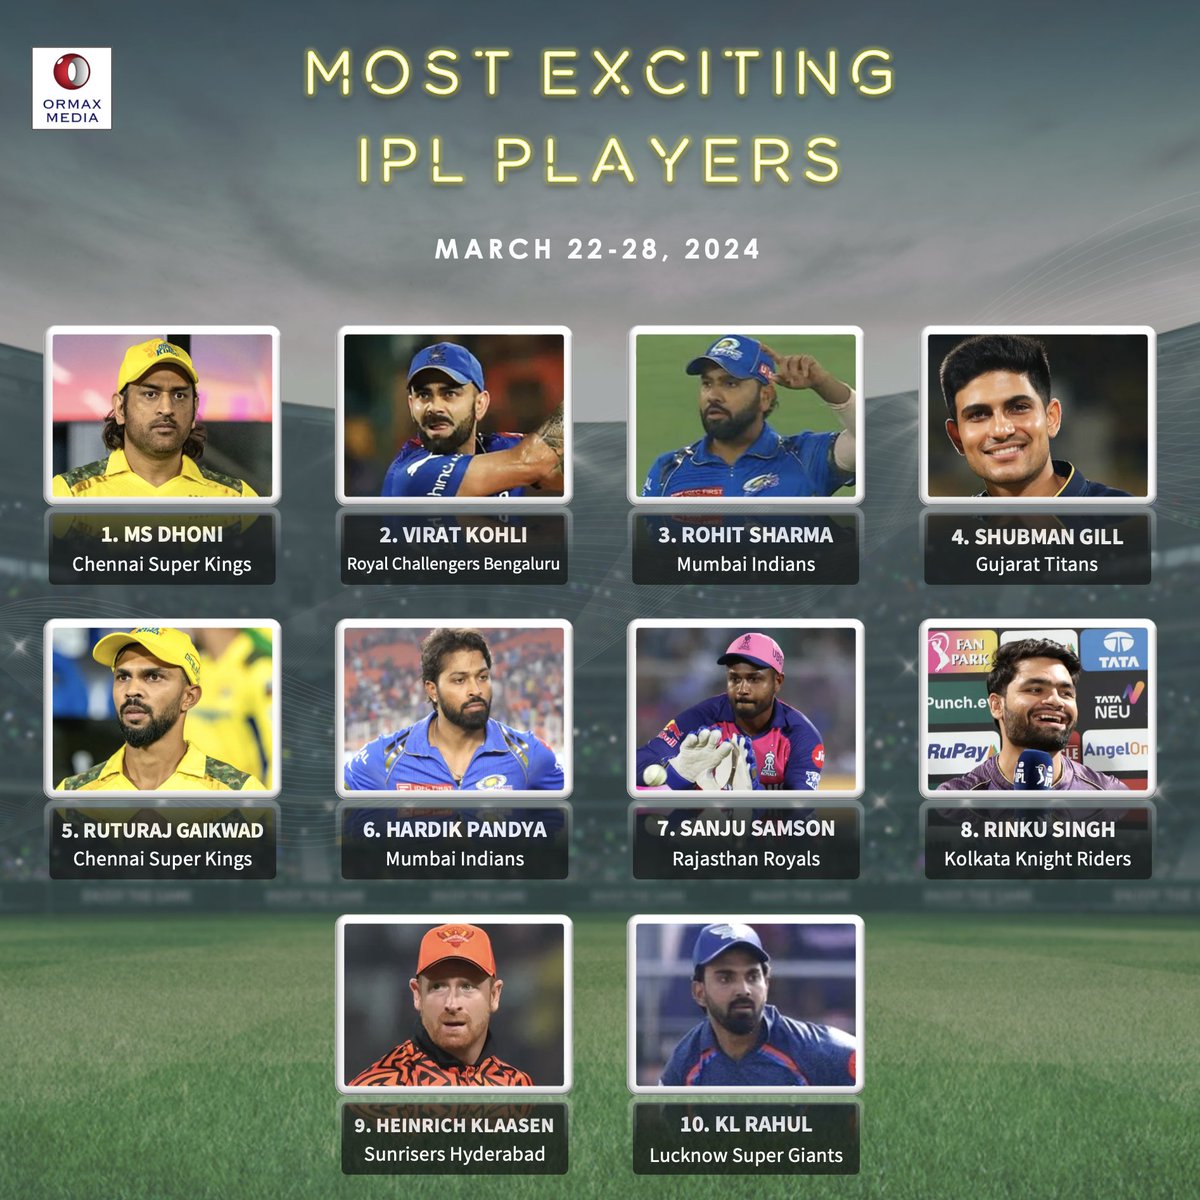 Most exciting IPL players (Mar 22-28) #IPL2024